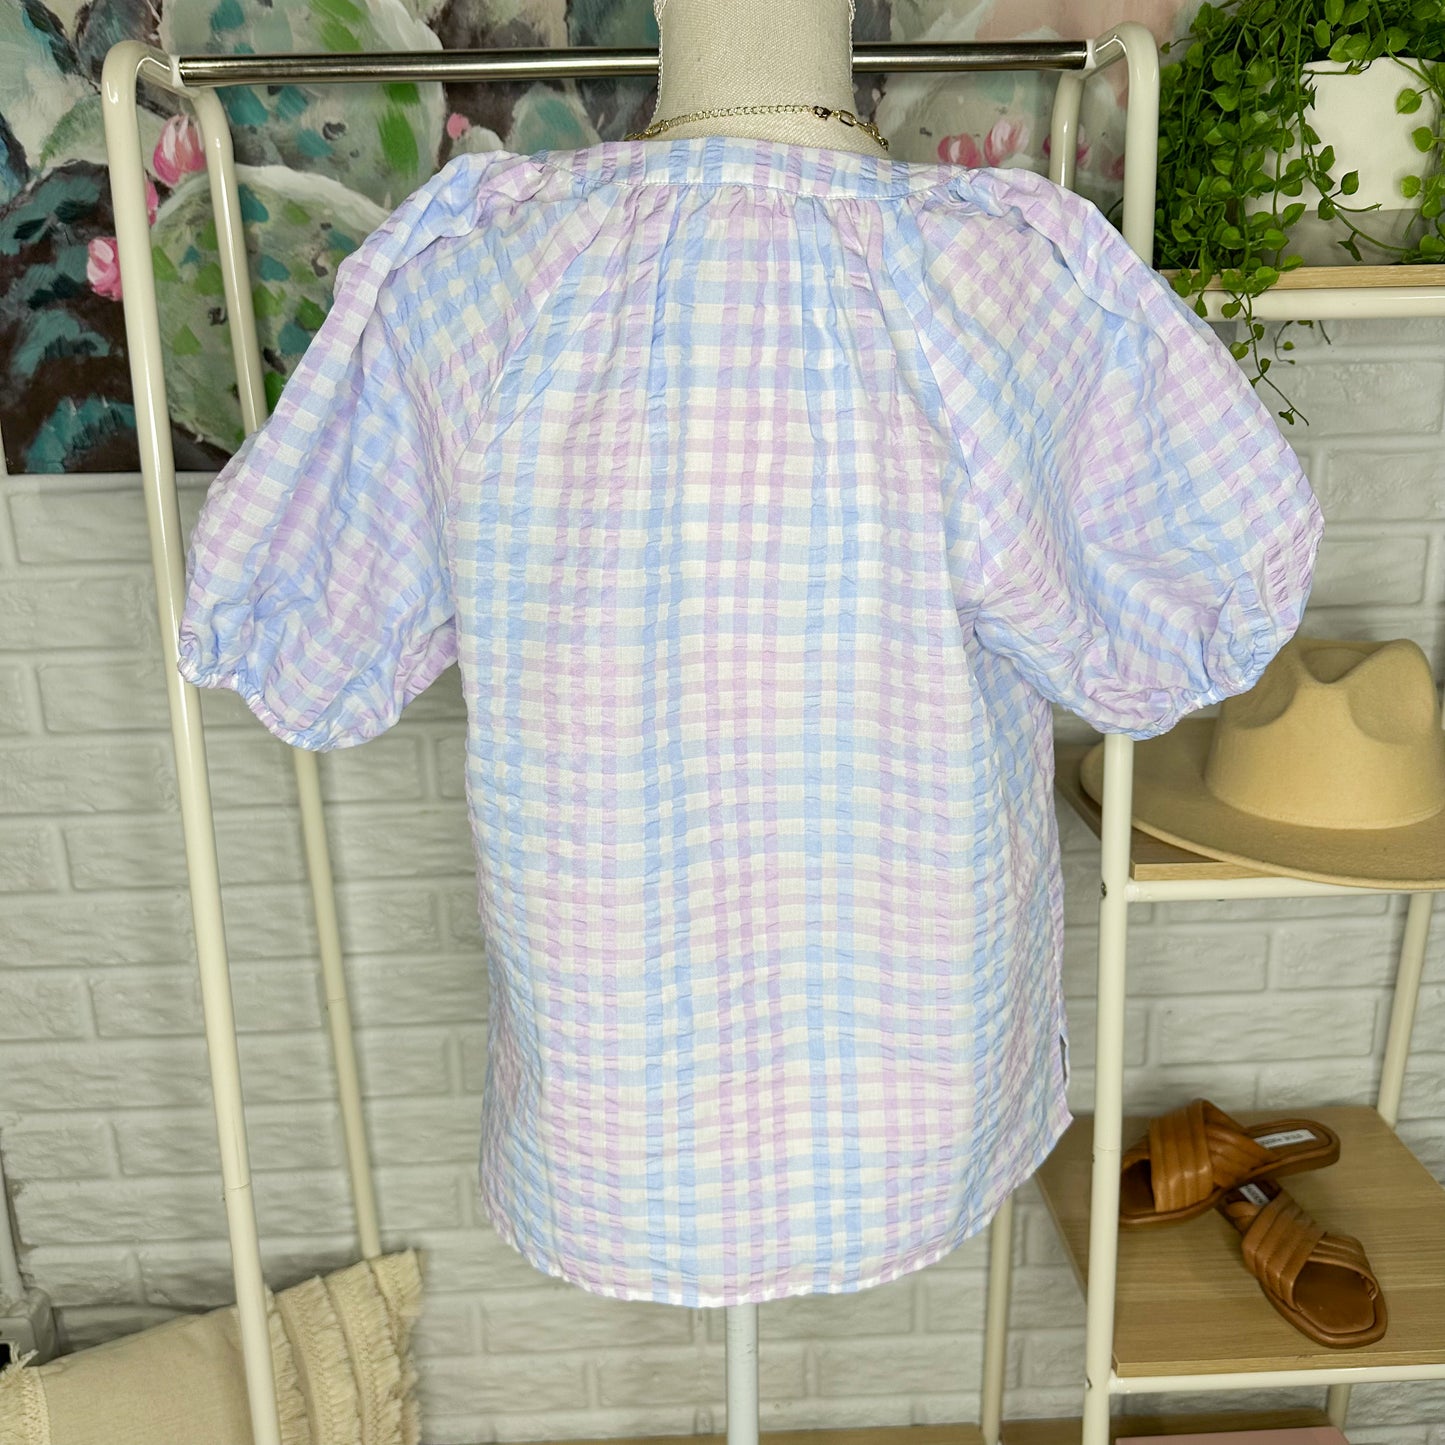 LOFT New Pastel Gingham Top Size Small